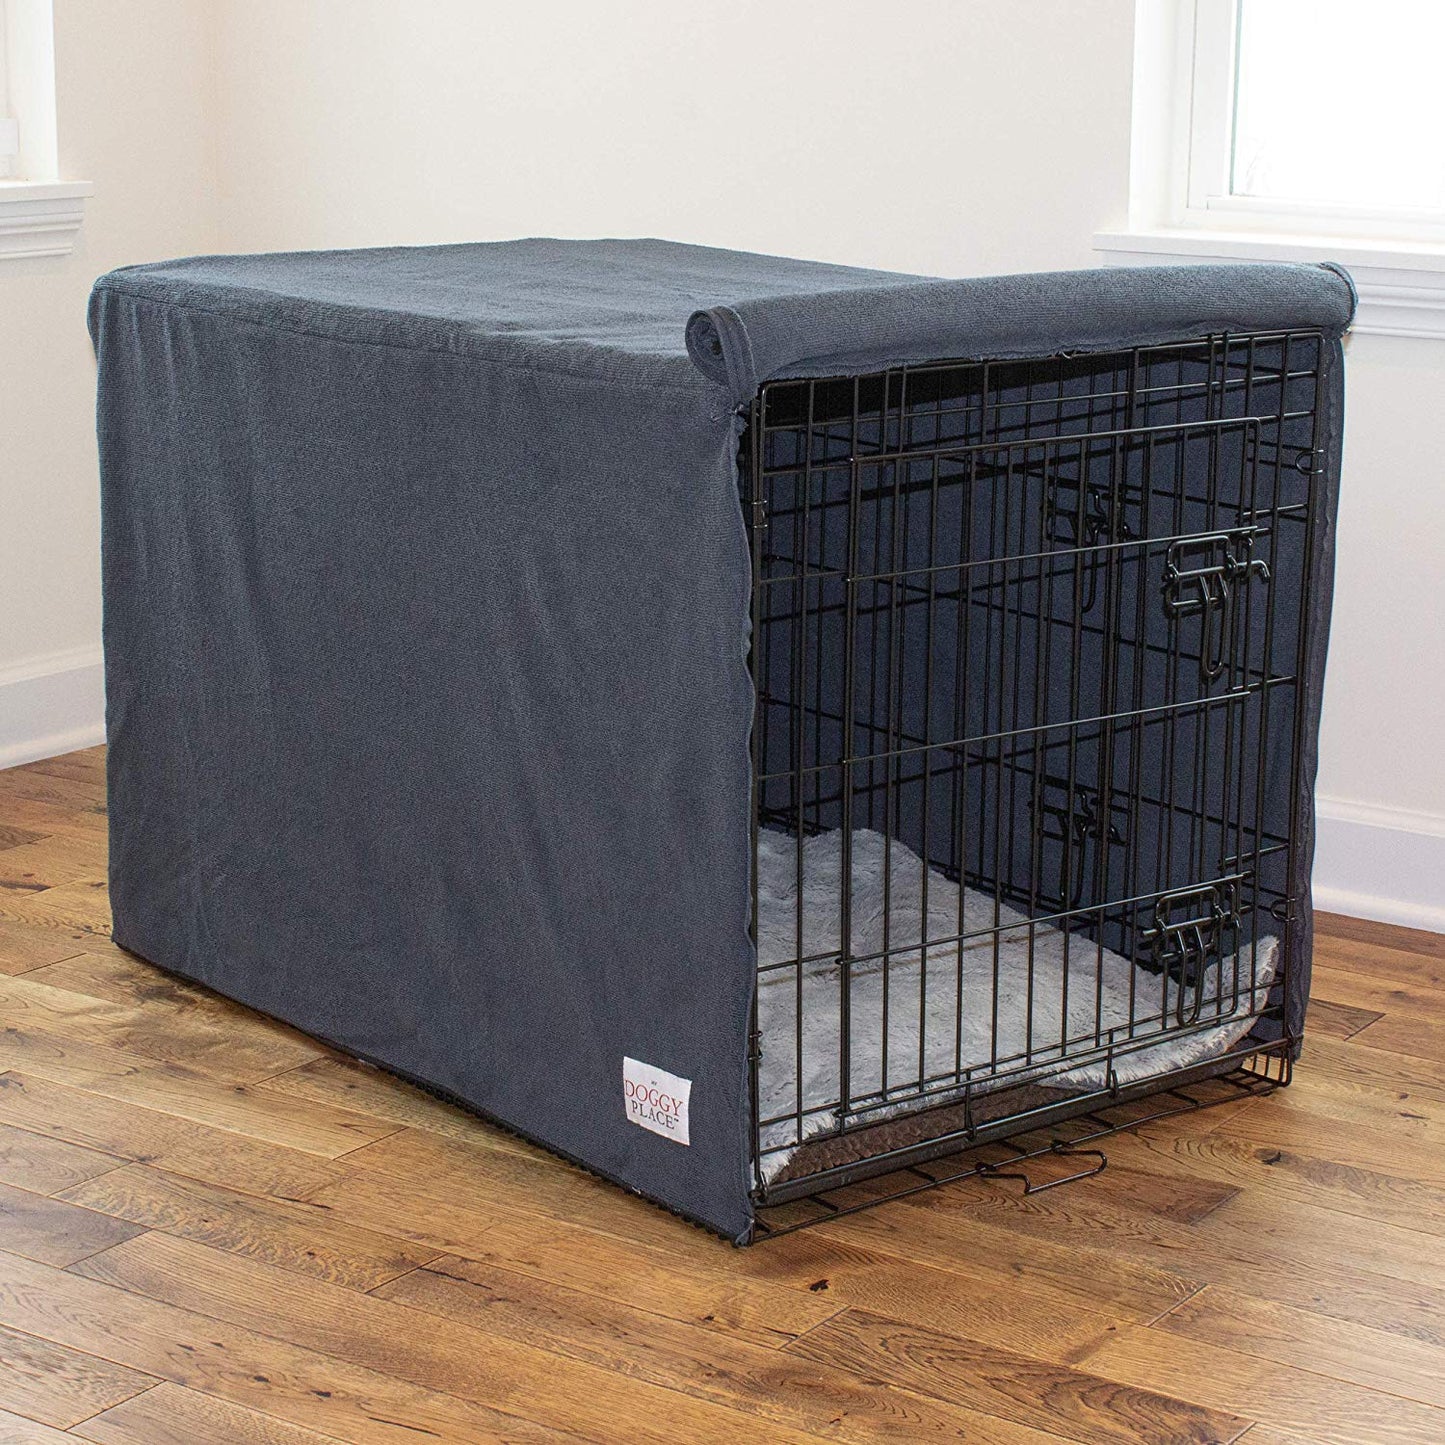 Microfiber Padded Crate Cover for Dogs - Multi-Size and Color Options